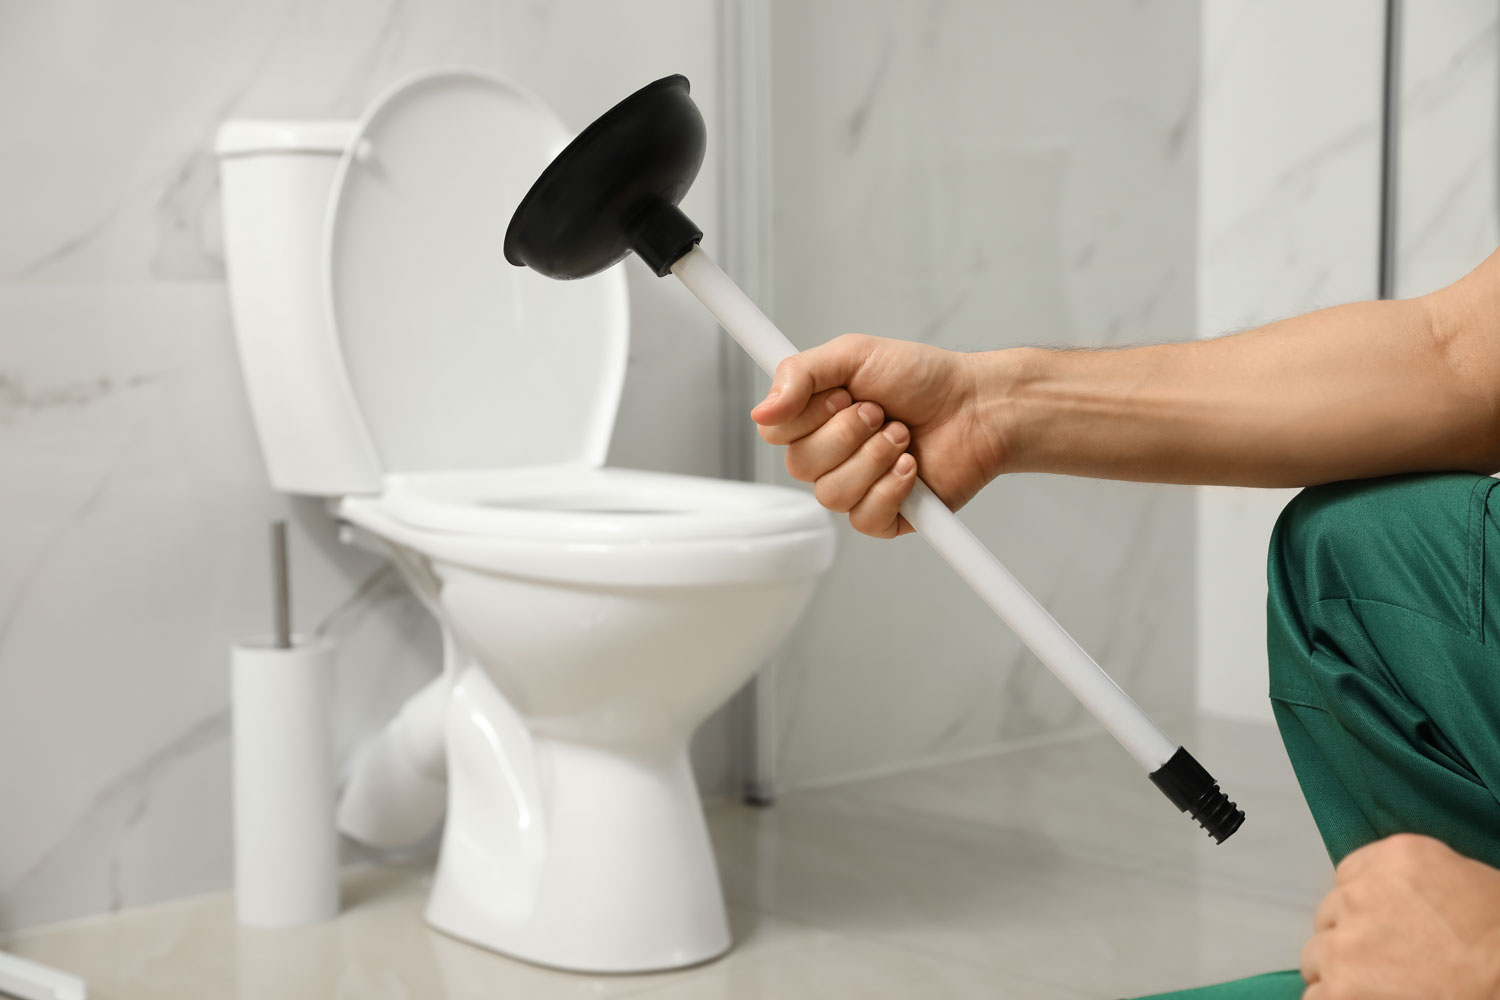 Bathroom accessory recommendation where to place plunger